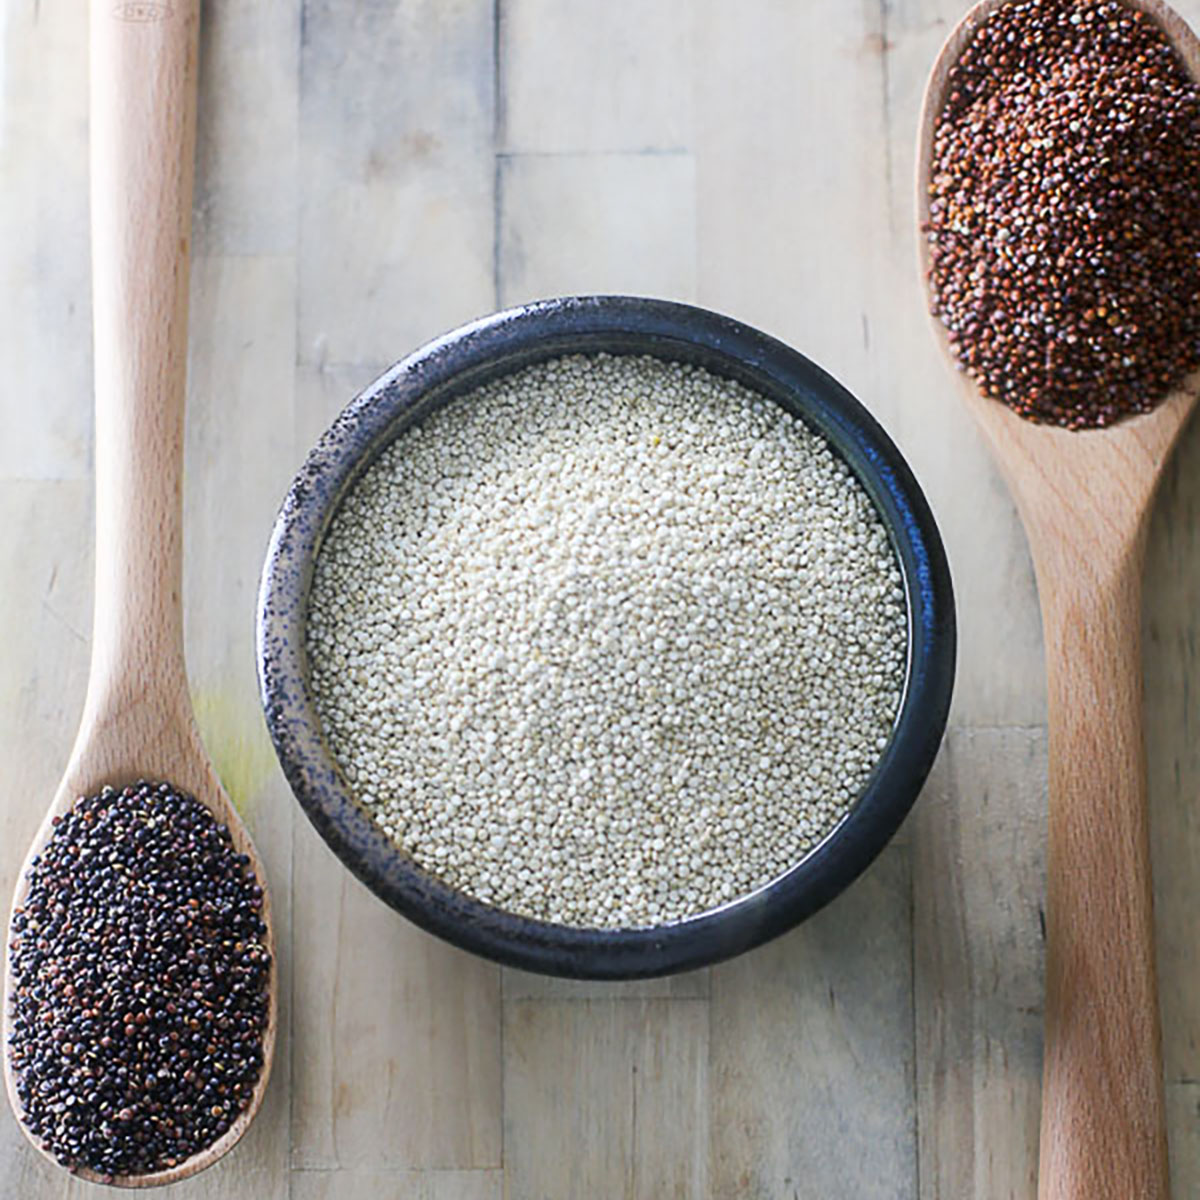 Demystifying Quinoa: an energy-boosting pseudocereal